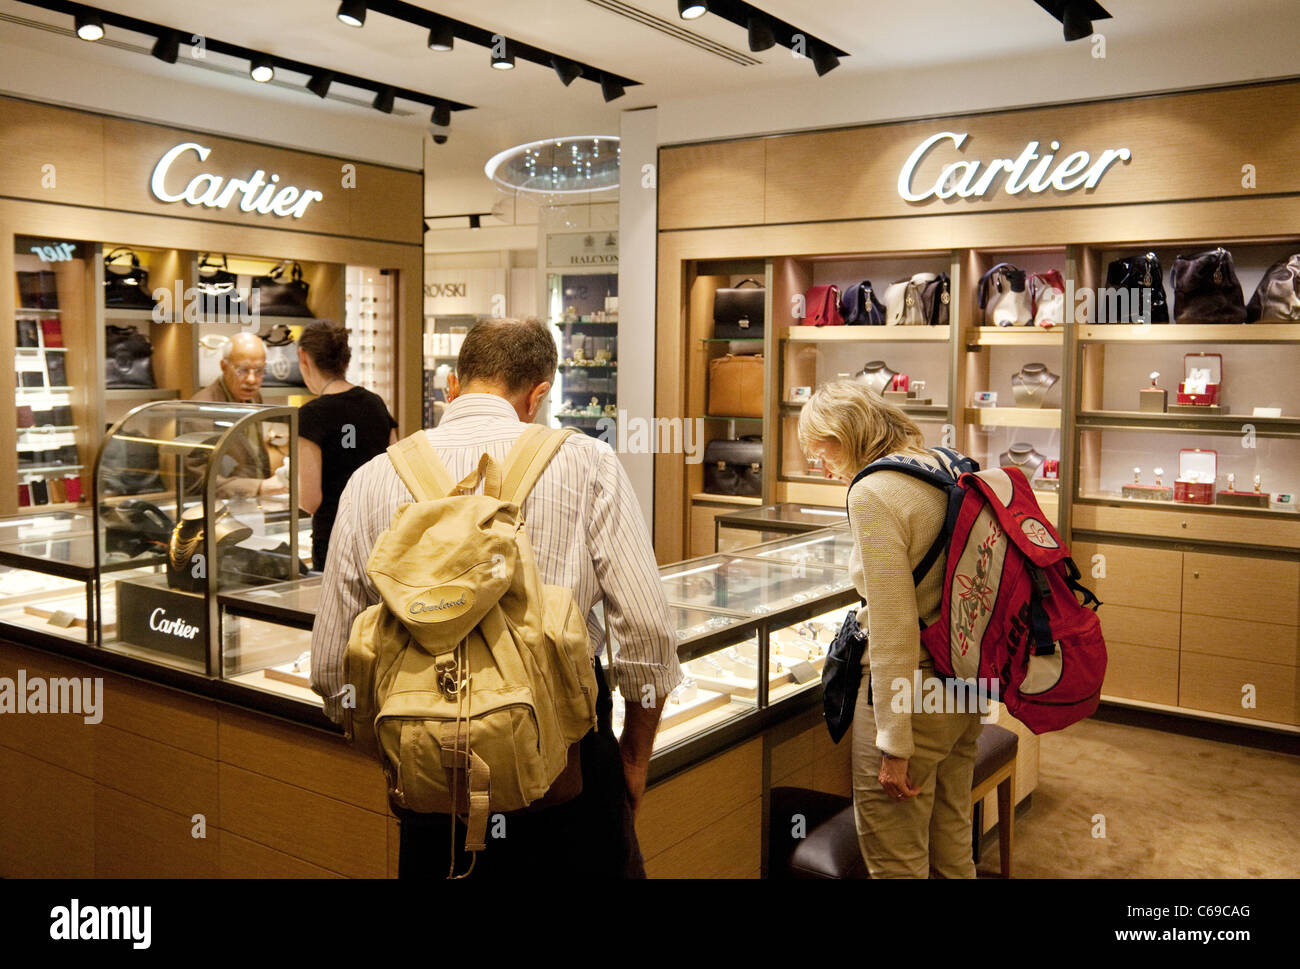 jewelry stores that sell cartier